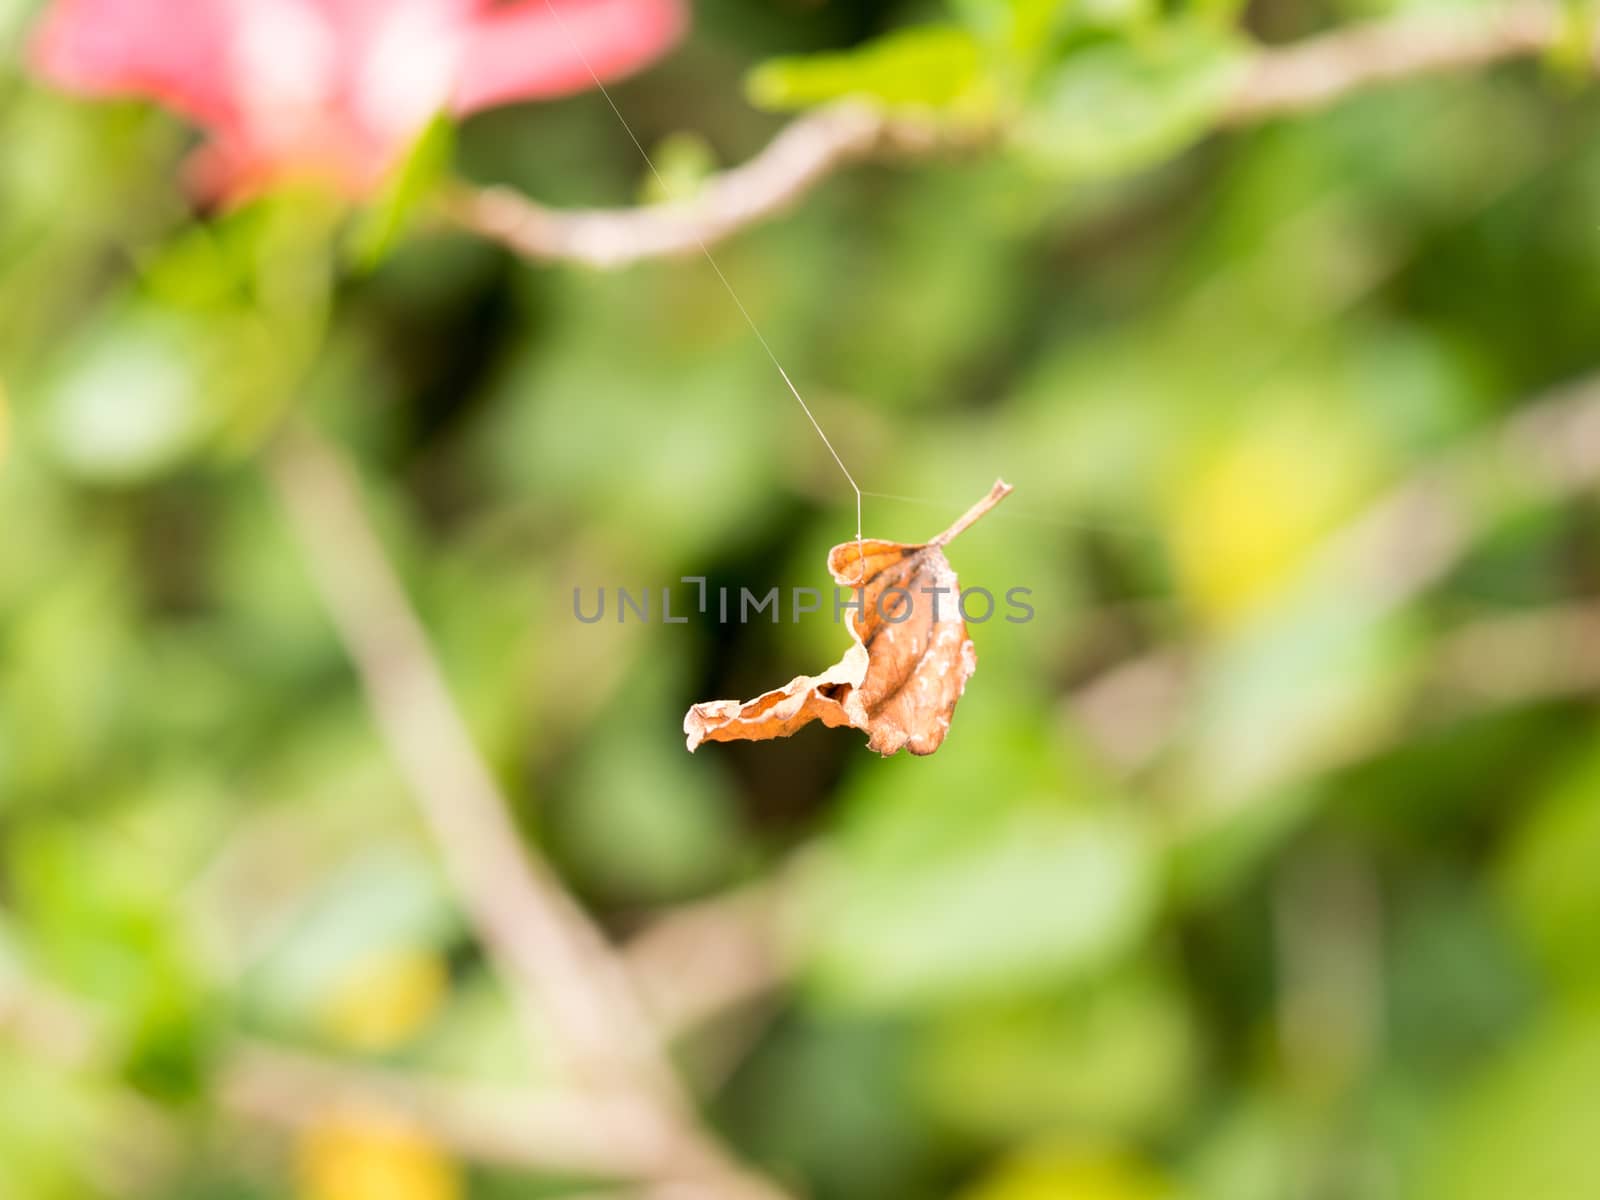 a leaf on a spider web. select focus and blur blackground.